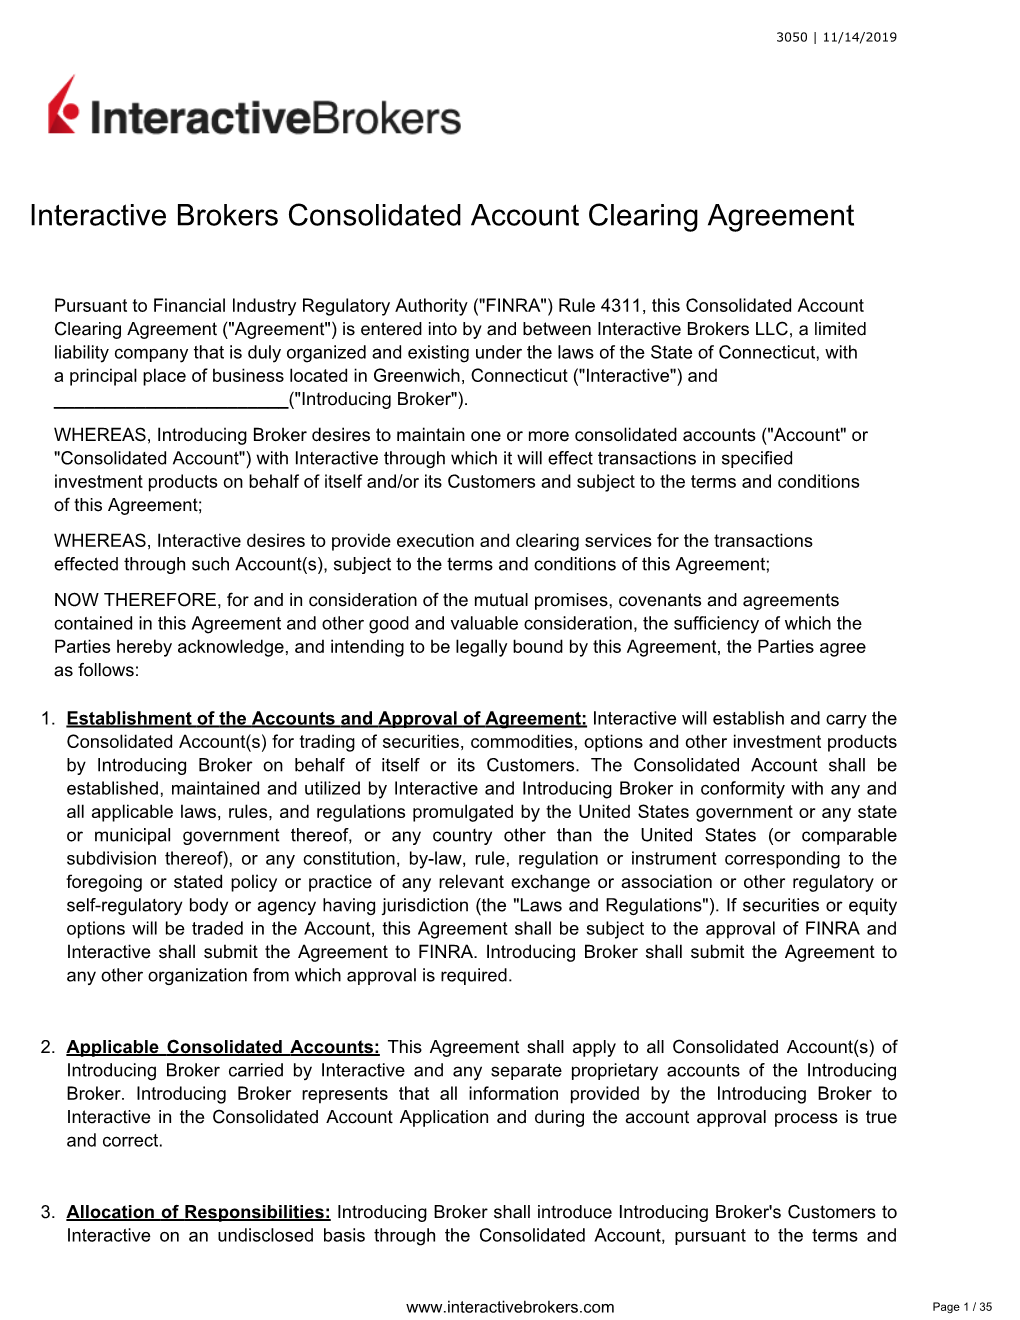 Interactive Brokers Consolidated Account Clearing Agreement